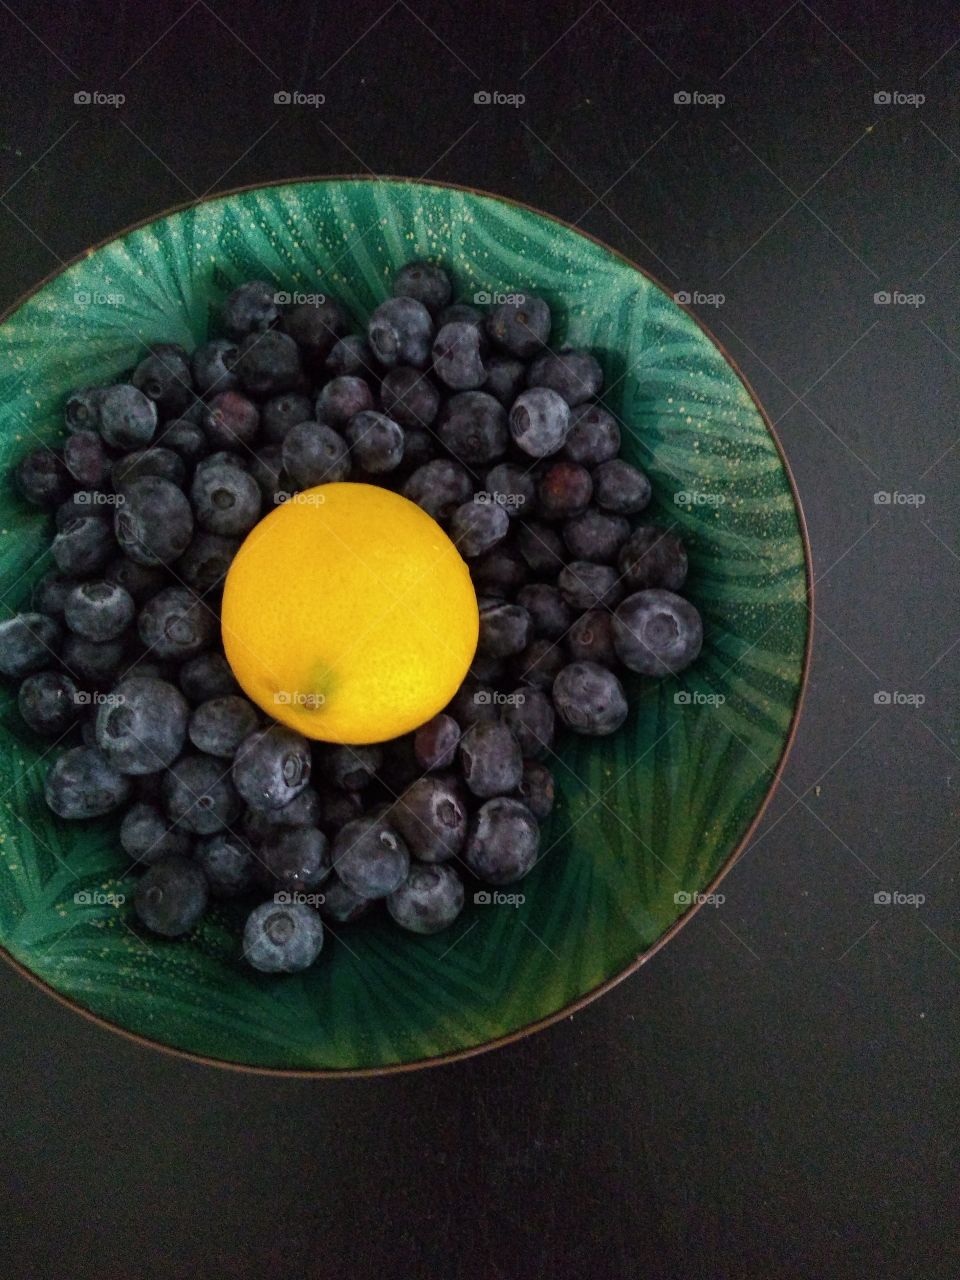 inside the bowl of this picture is blueberries and lemon done on a black table.